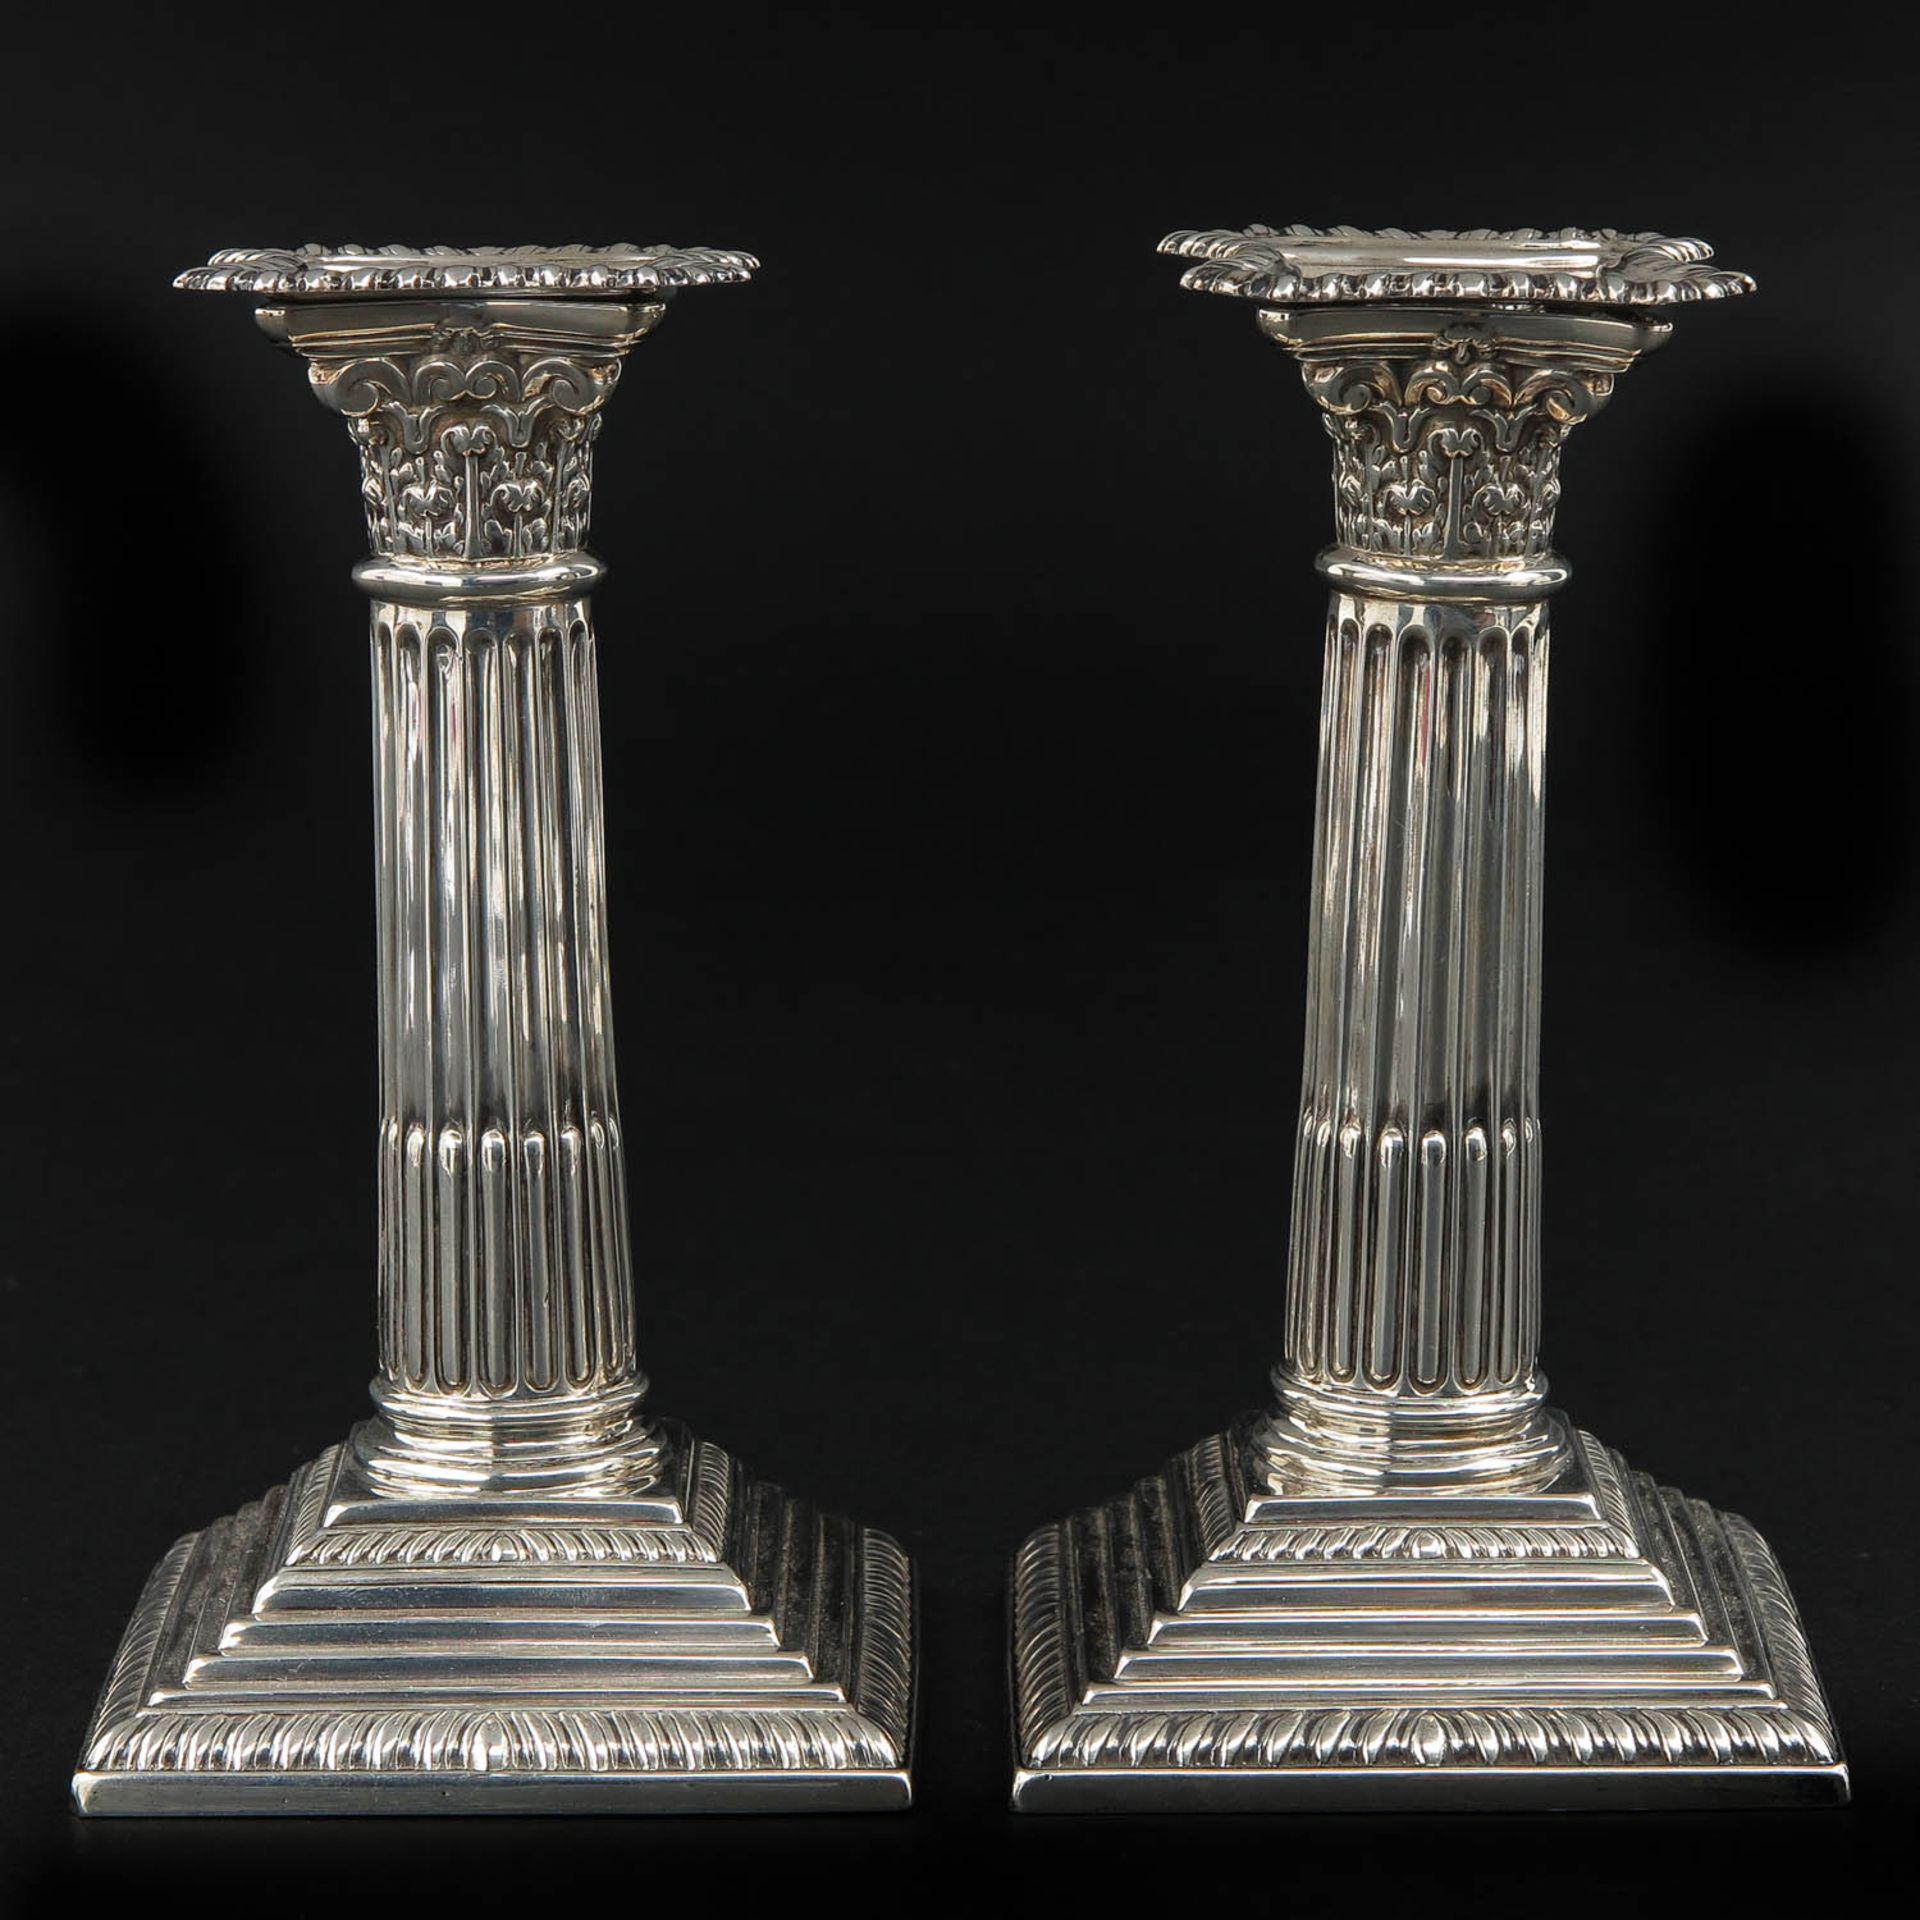 A Pair of English Silver Candlesticks